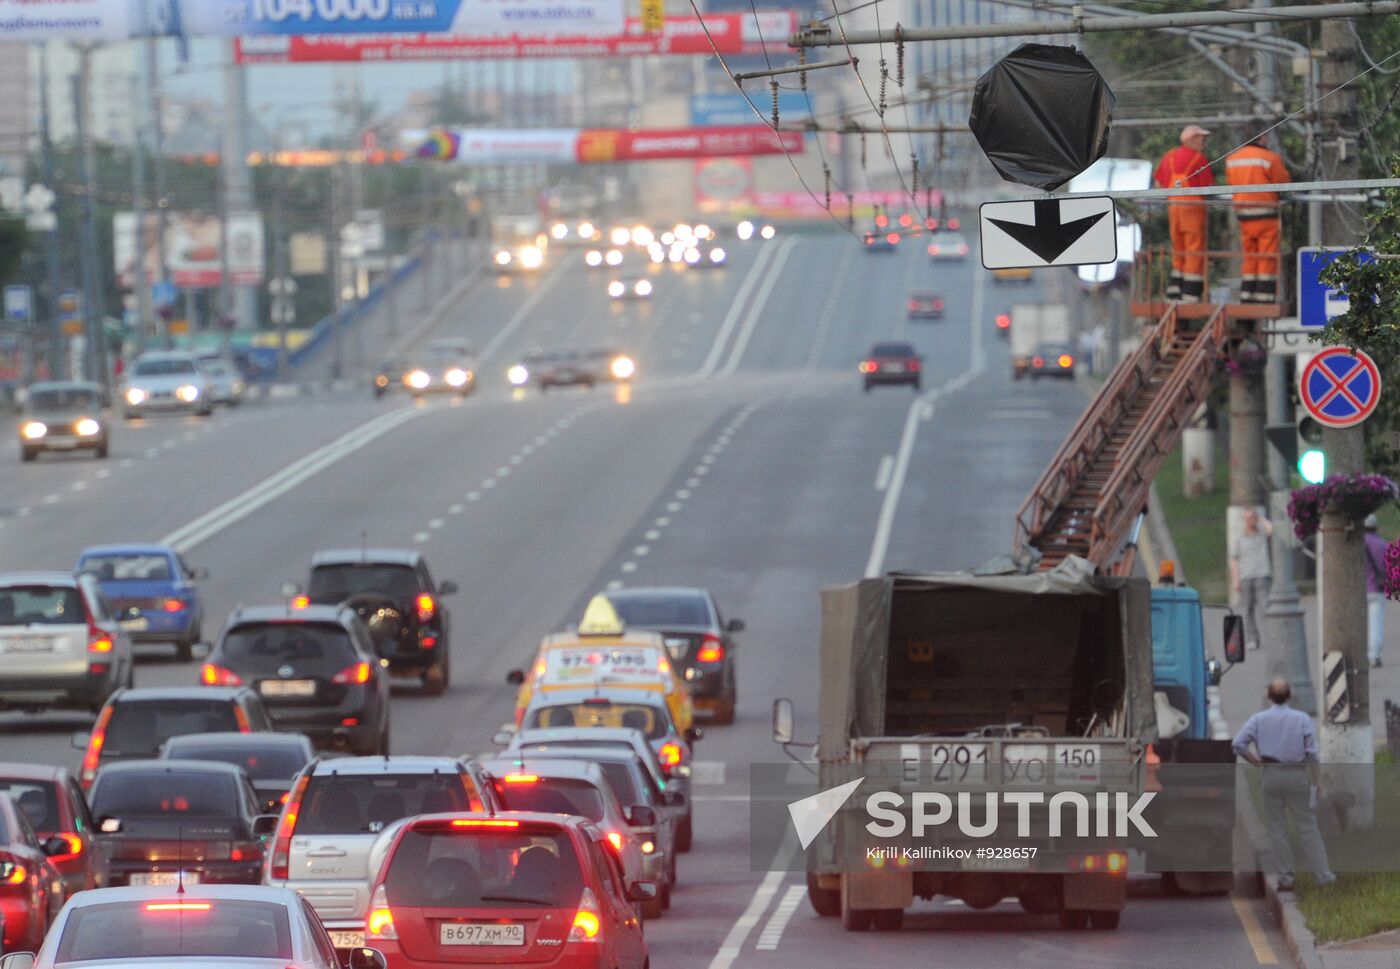 Bus lane signs posted in Moscow